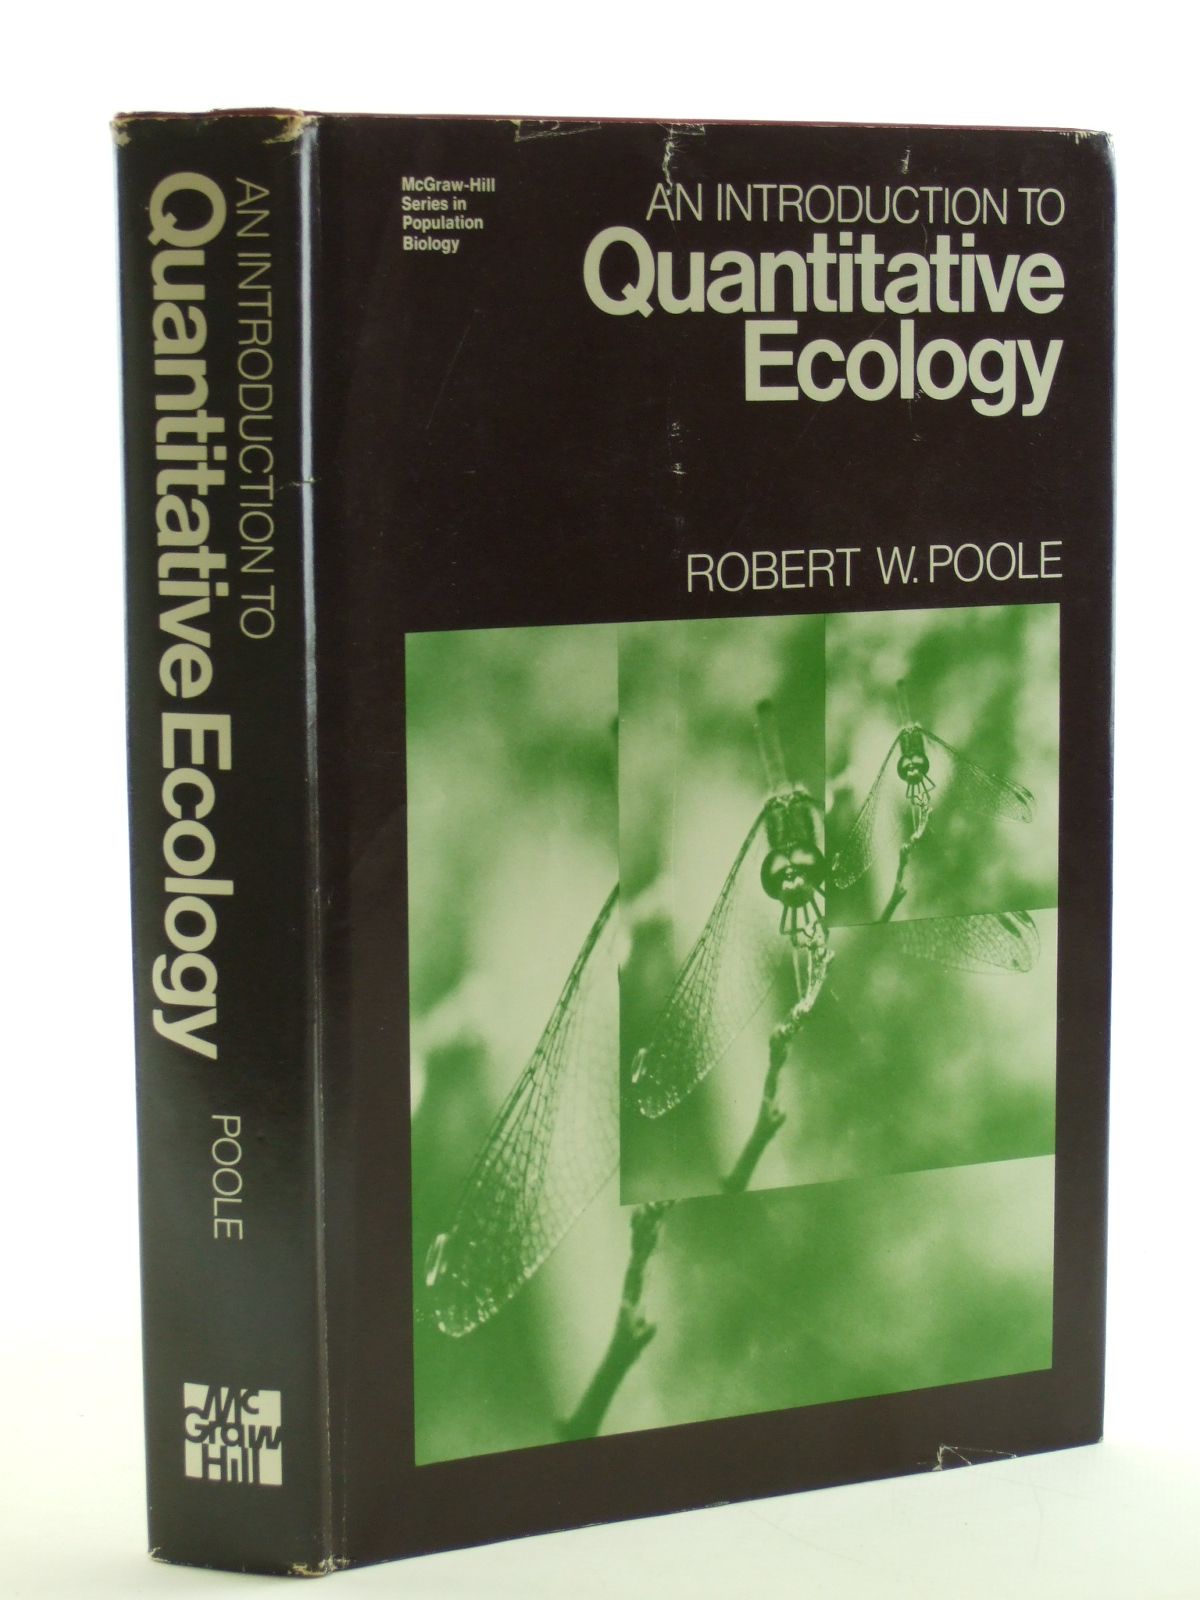 Photo of AN INTRODUCTION TO QUANTITATIVE ECOLOGY written by Poole, Robert W. published by McGraw-Hill (STOCK CODE: 1602947)  for sale by Stella & Rose's Books